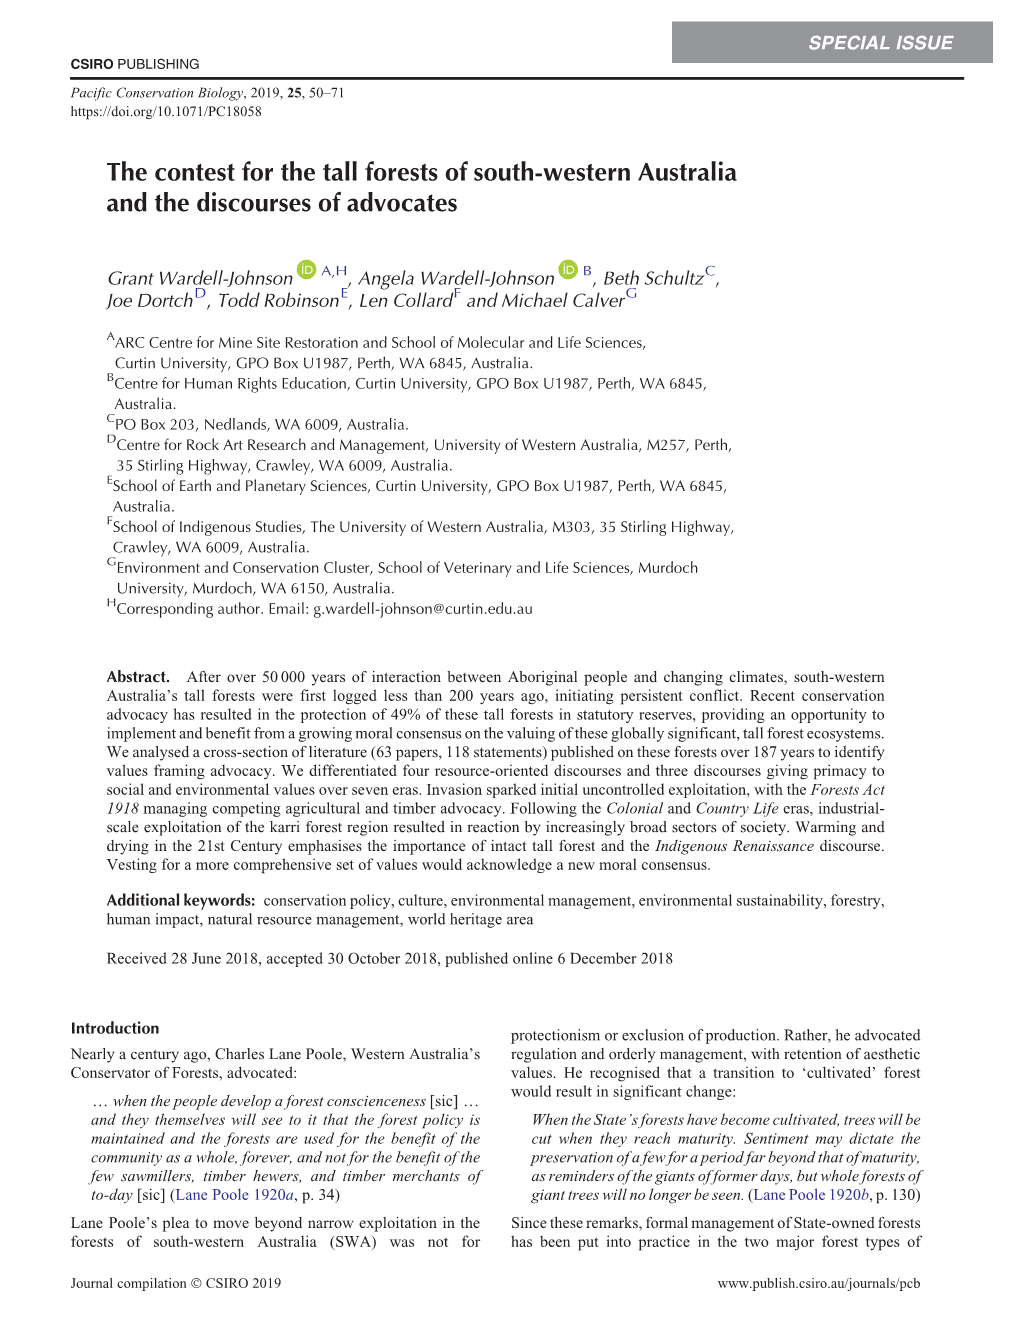 The Contest for the Tall Forests of South-Western Australia and the Discourses of Advocates